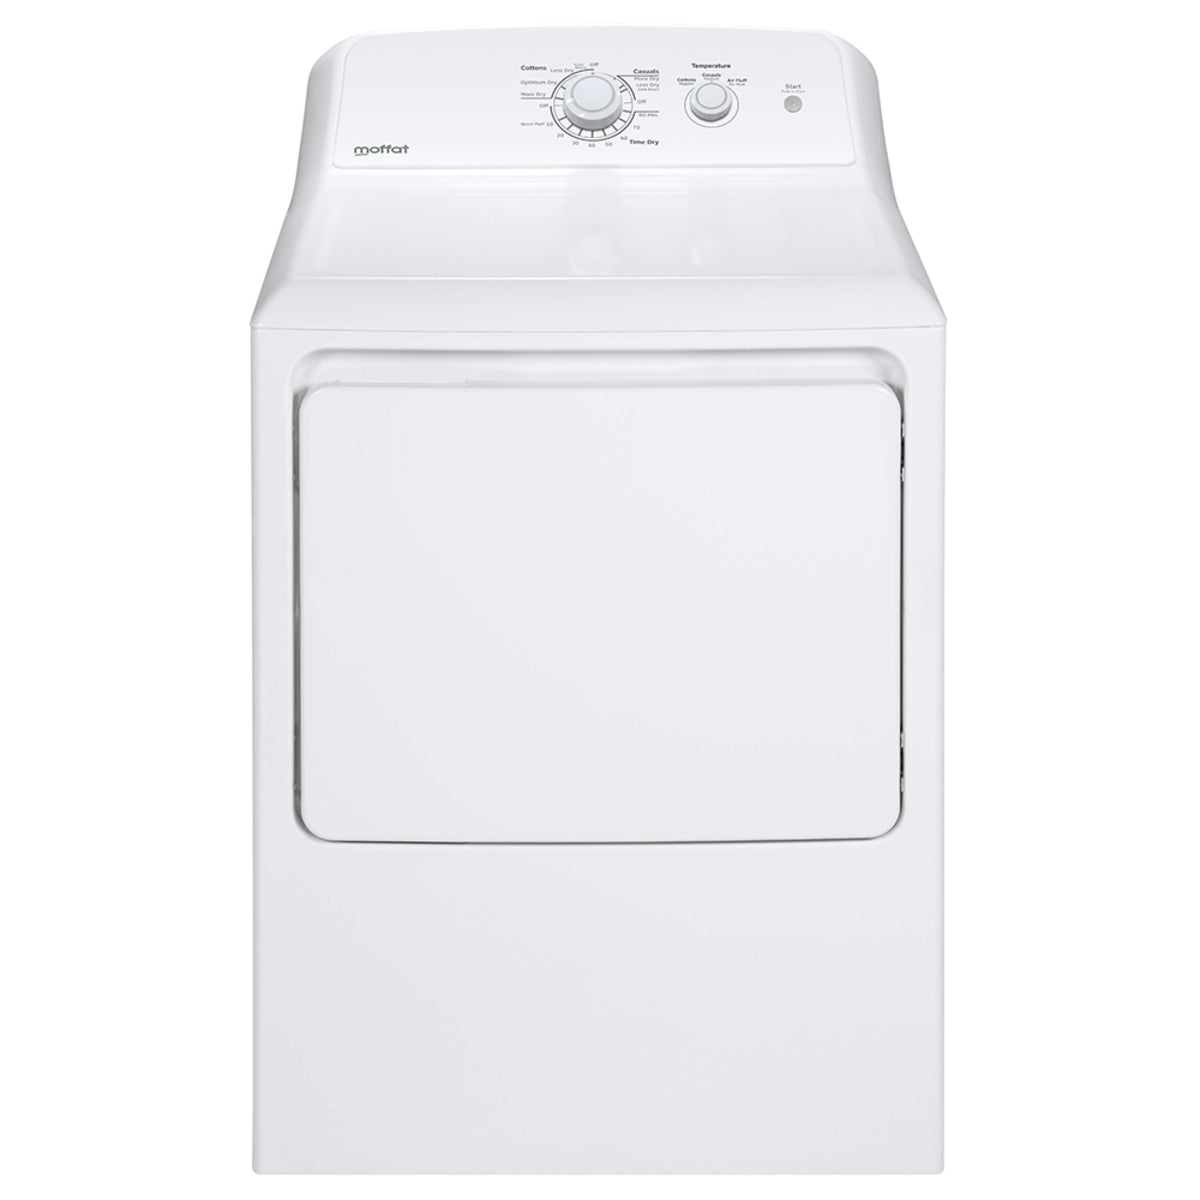 GE - 6.2 cu. Ft  Electric Dryer in White - MTX22EBMRWW